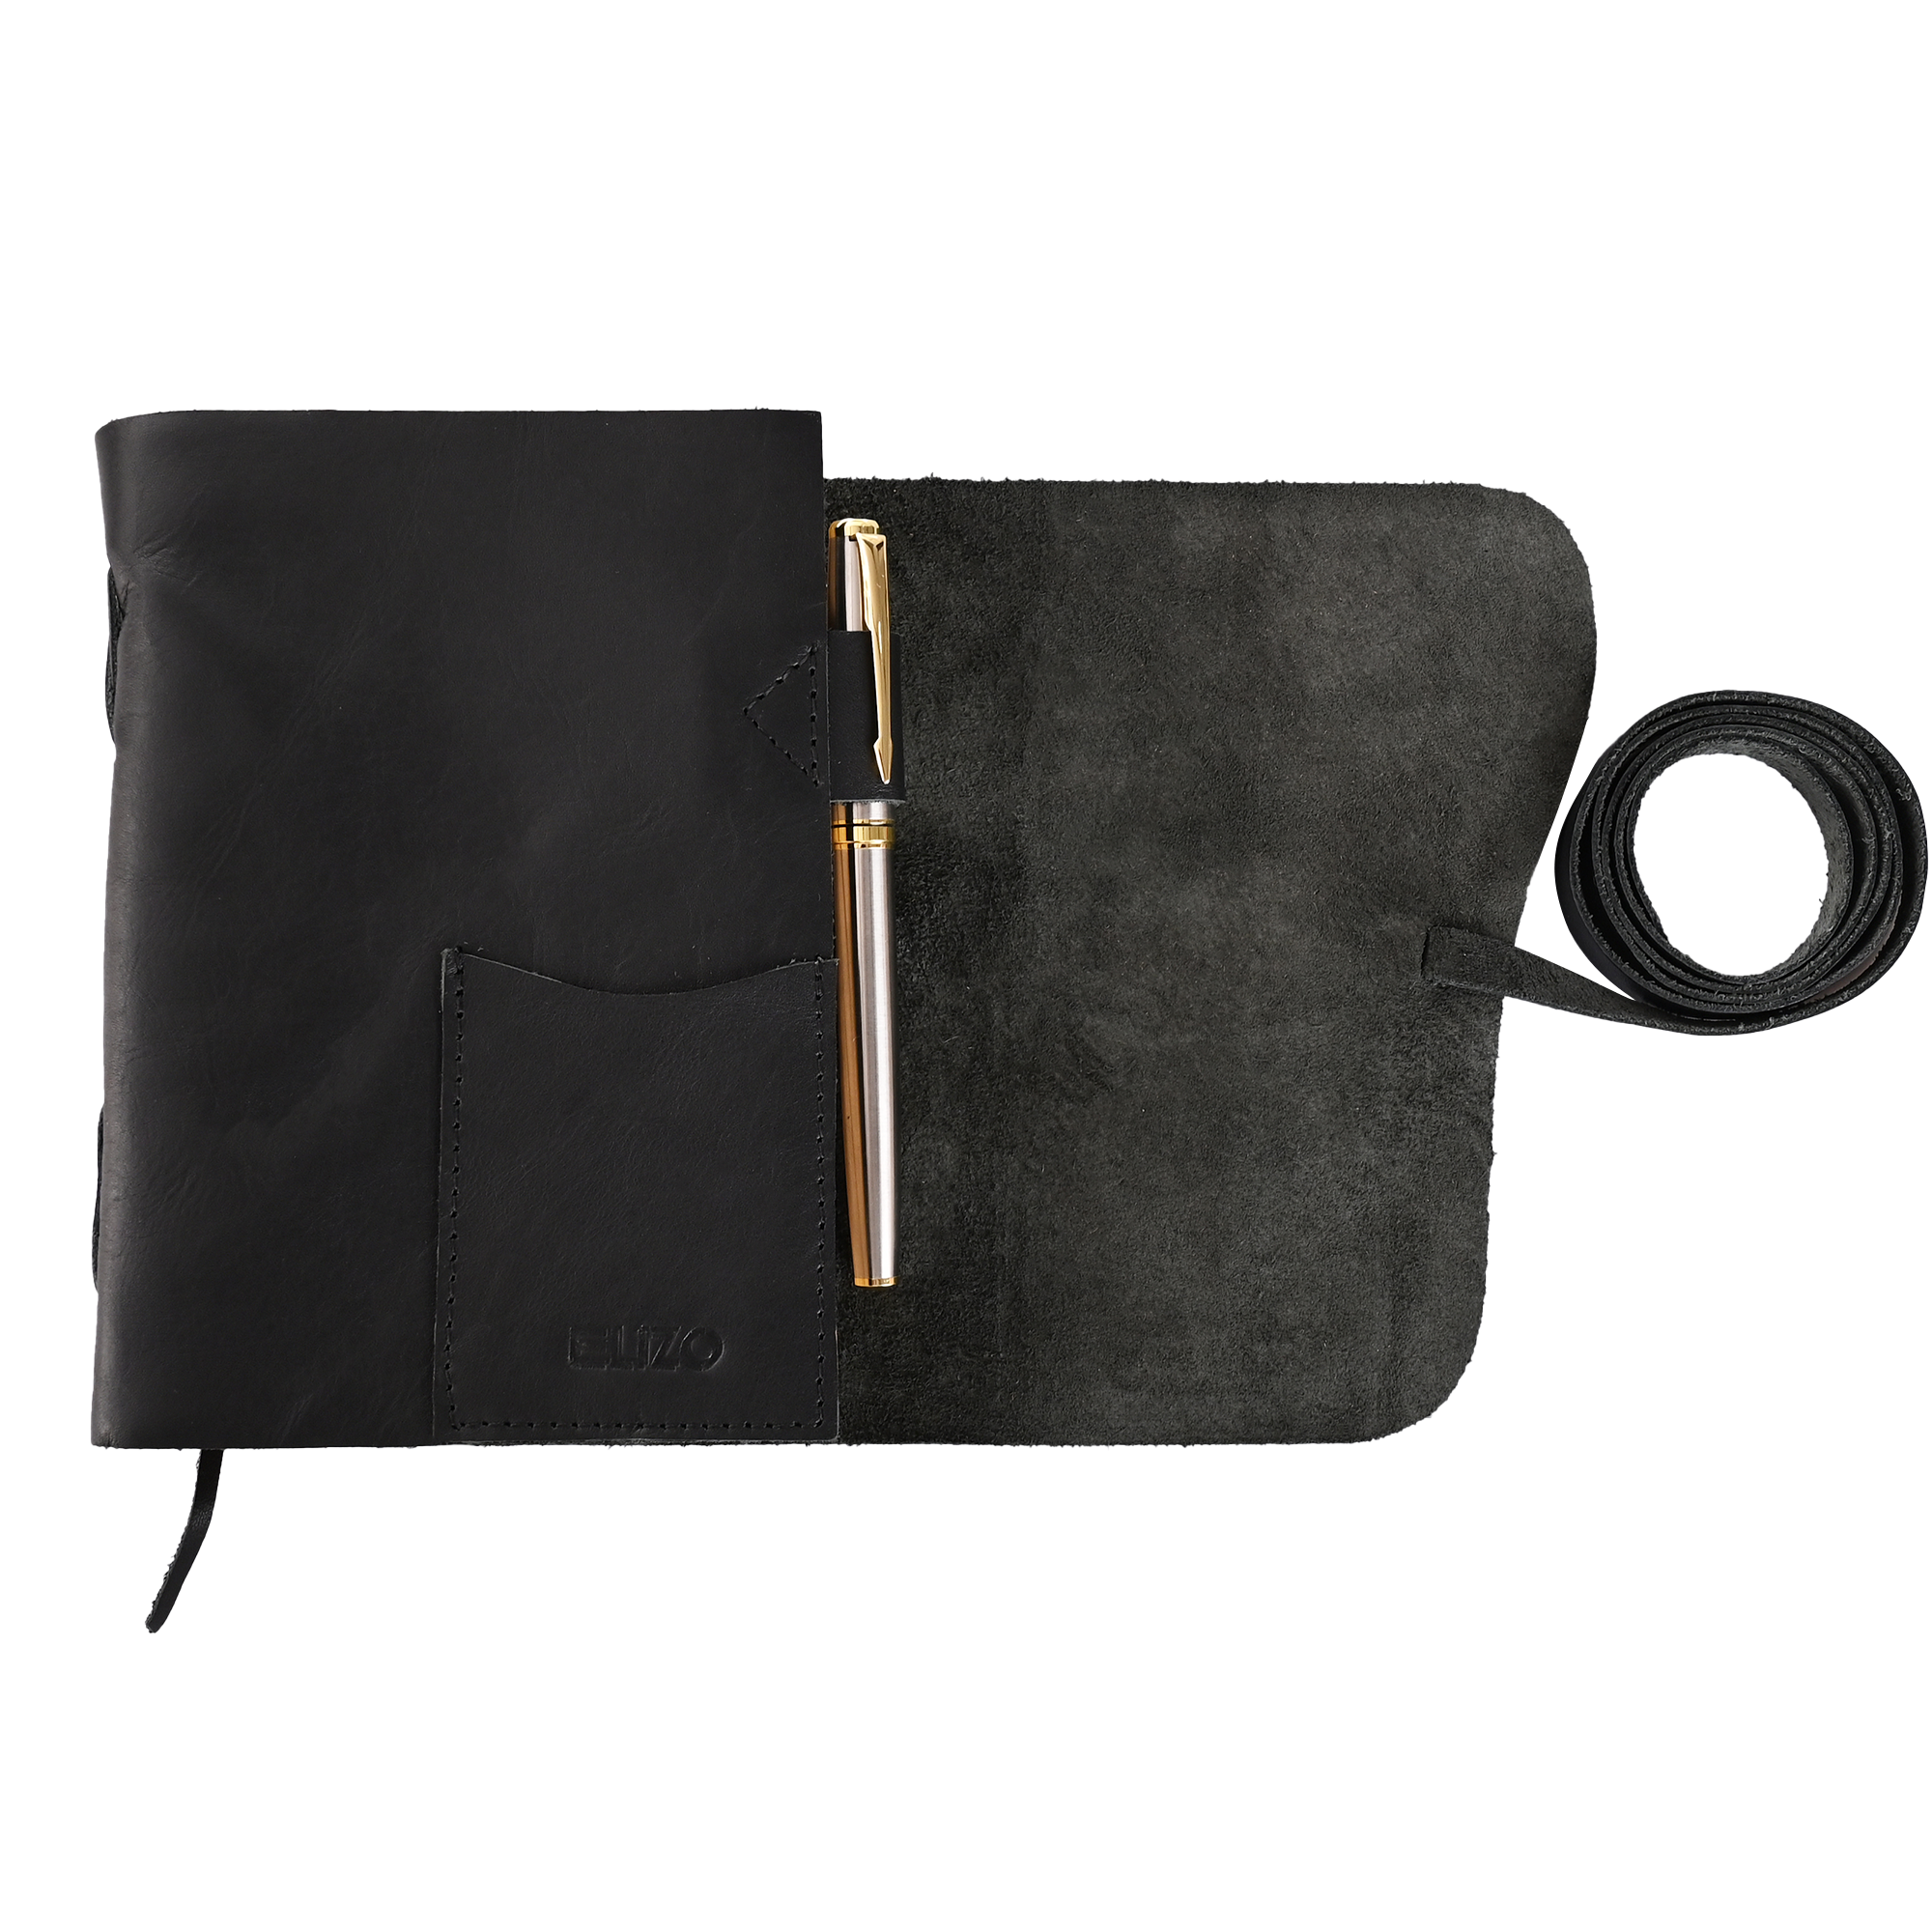 Refillable Writing Journal Lined Natural - Black Onyx (5x7)